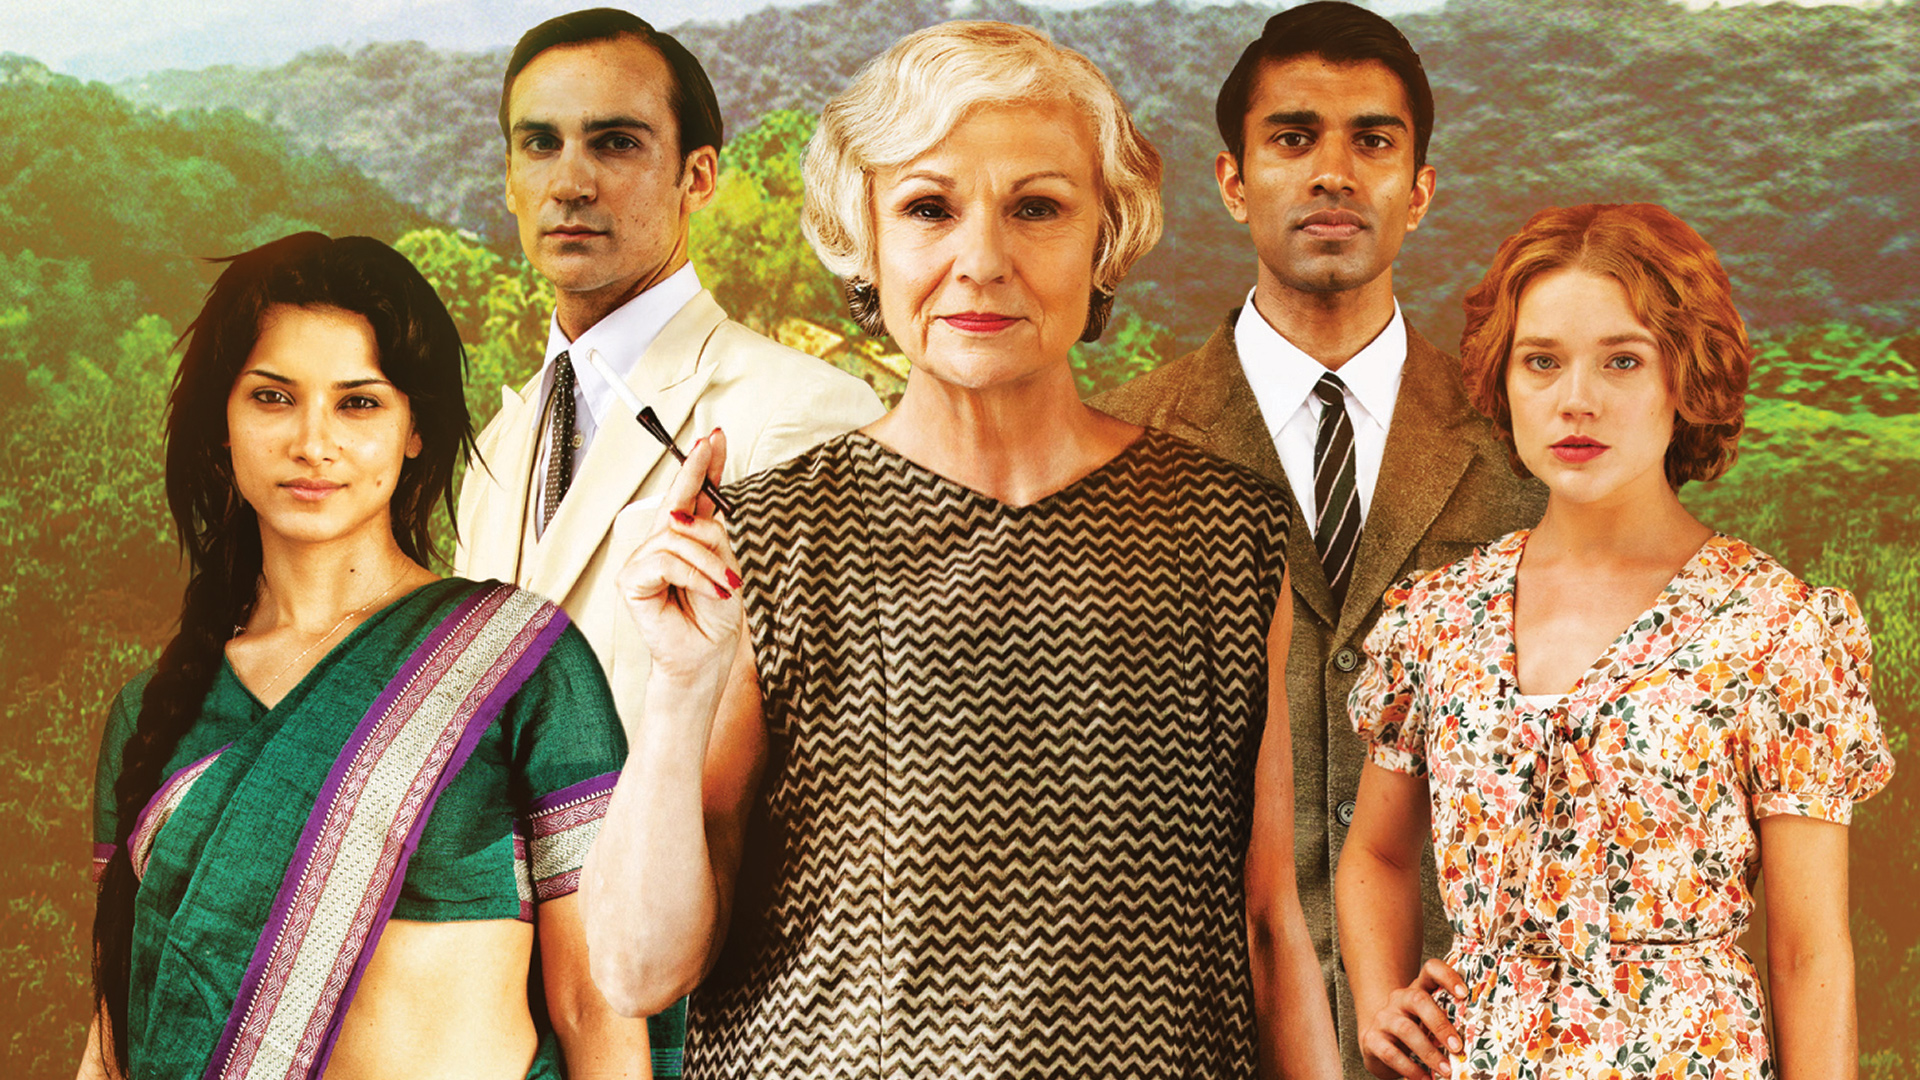 Indian Summers Pbs Previews Season Two Of Masterpiece Drama Canceled Renewed Tv Shows